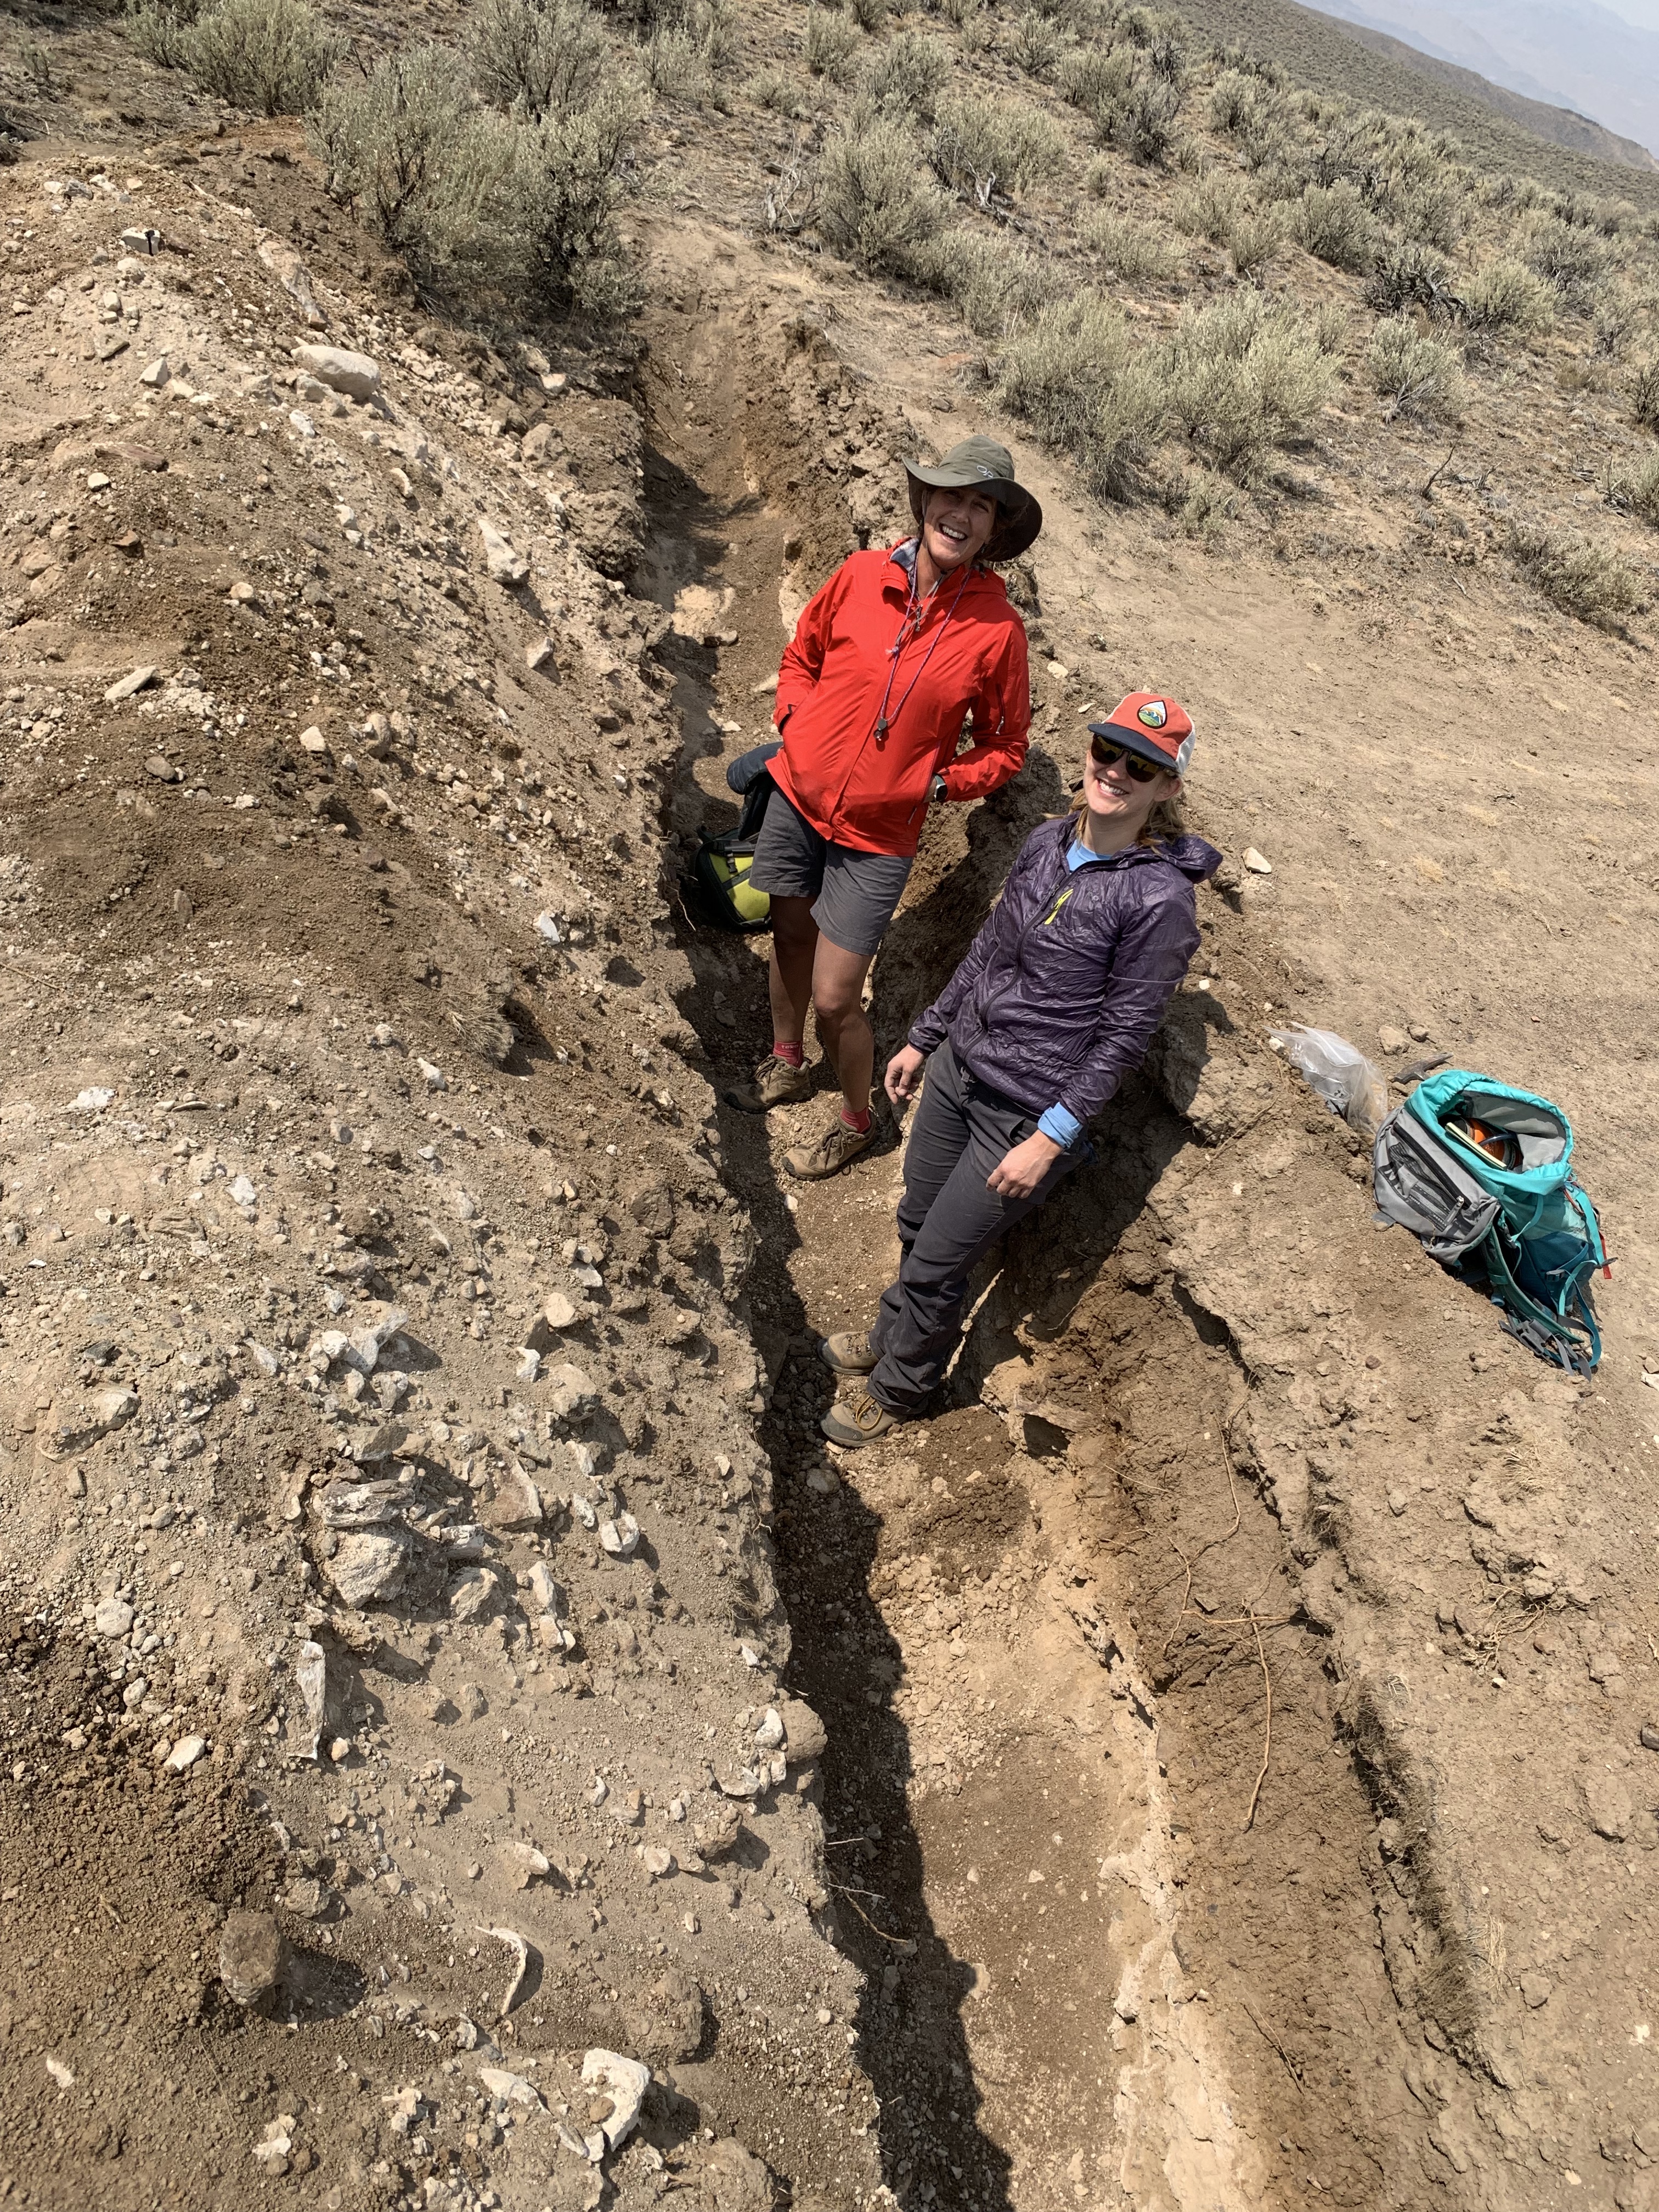 Happy to see a trench exposing a calcic soil - this is what Naomi and I came here for!